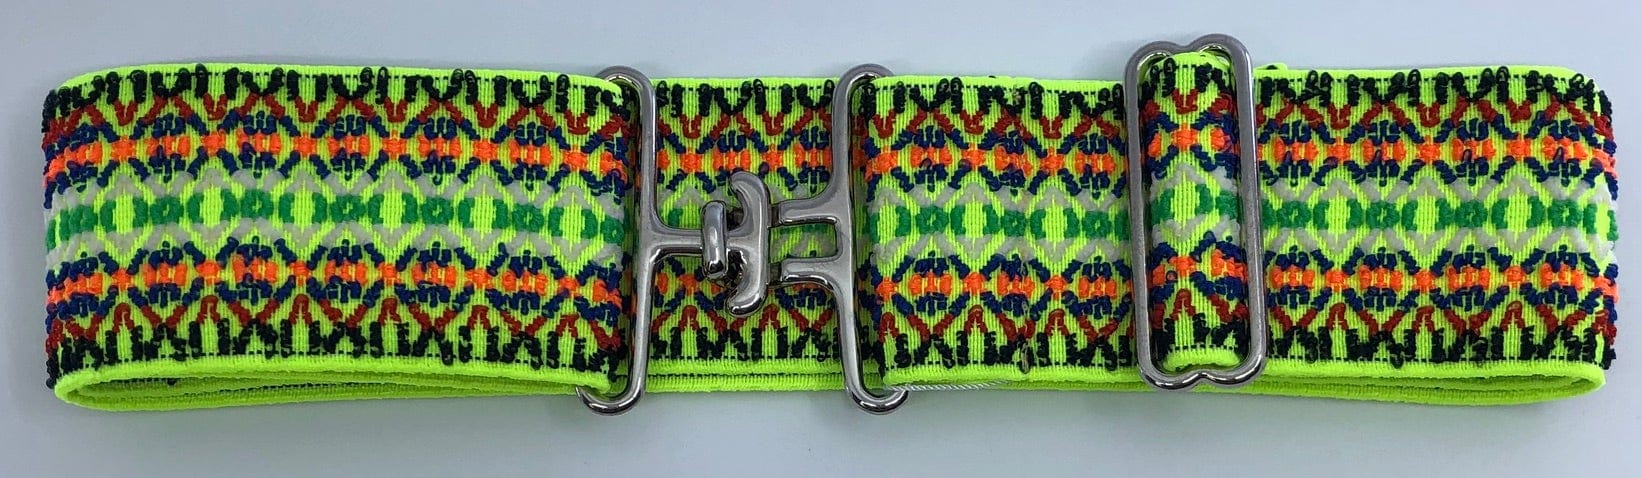 Blue Ribbon Belts Belt Silver T Buckle Neon Yellow/Multi Guitar Strap Belt-2 inch equestrian team apparel online tack store mobile tack store custom farm apparel custom show stable clothing equestrian lifestyle horse show clothing riding clothes horses equestrian tack store